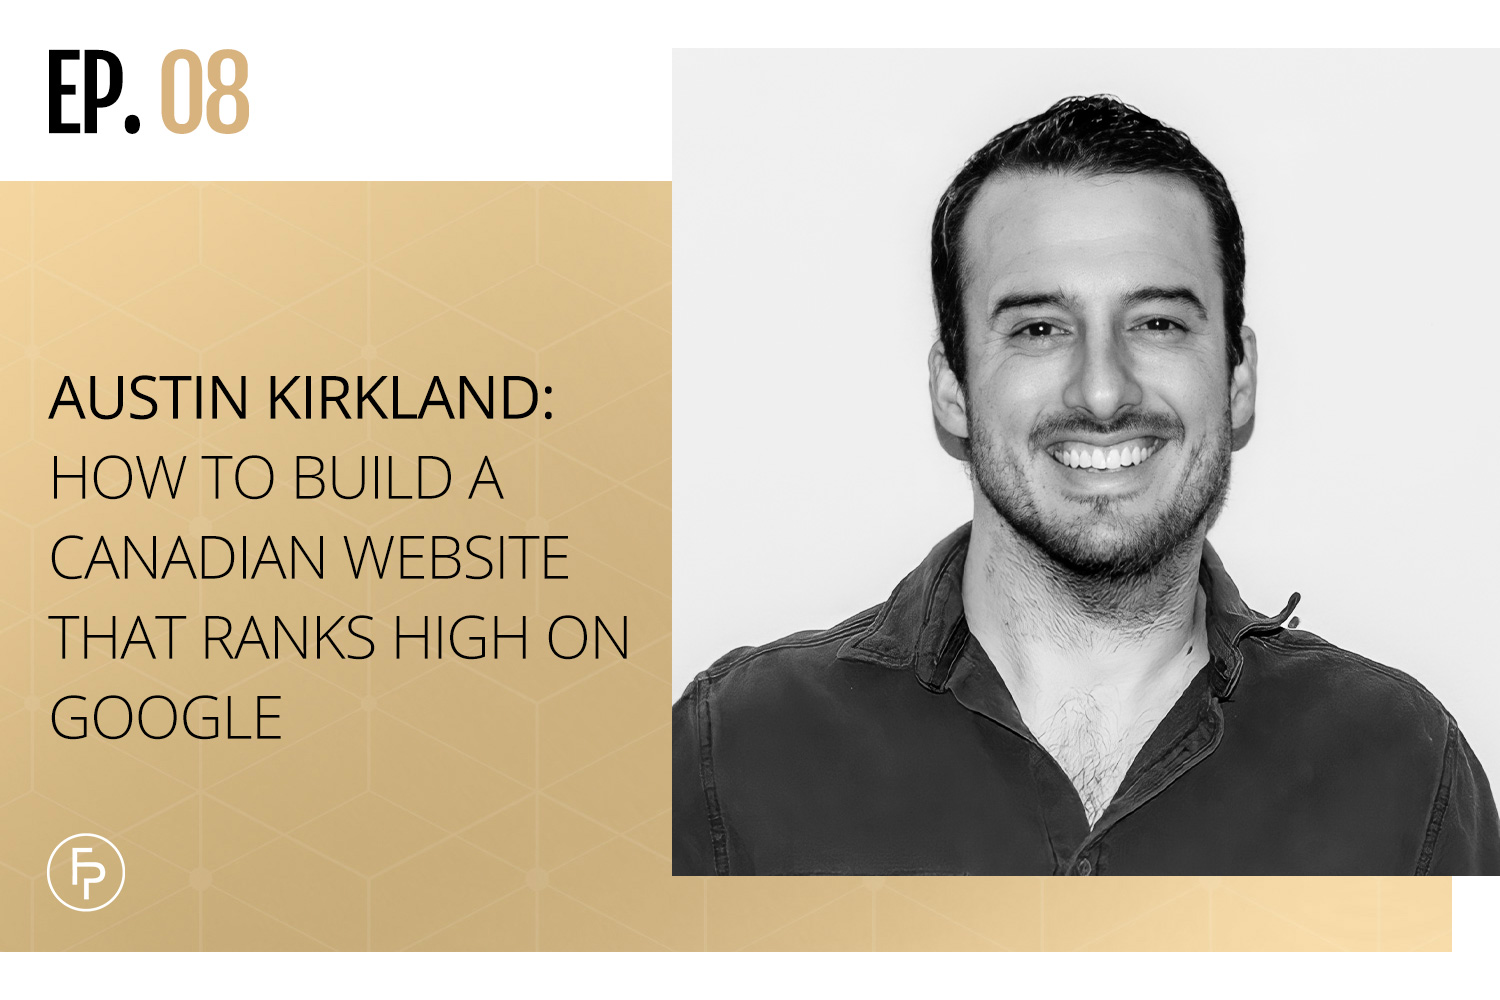 HOW TO BUILD A CANADIAN WEBSITE THAT RANKS HIGH ON GOOGLE WITH AUSTIN KIRKLAND